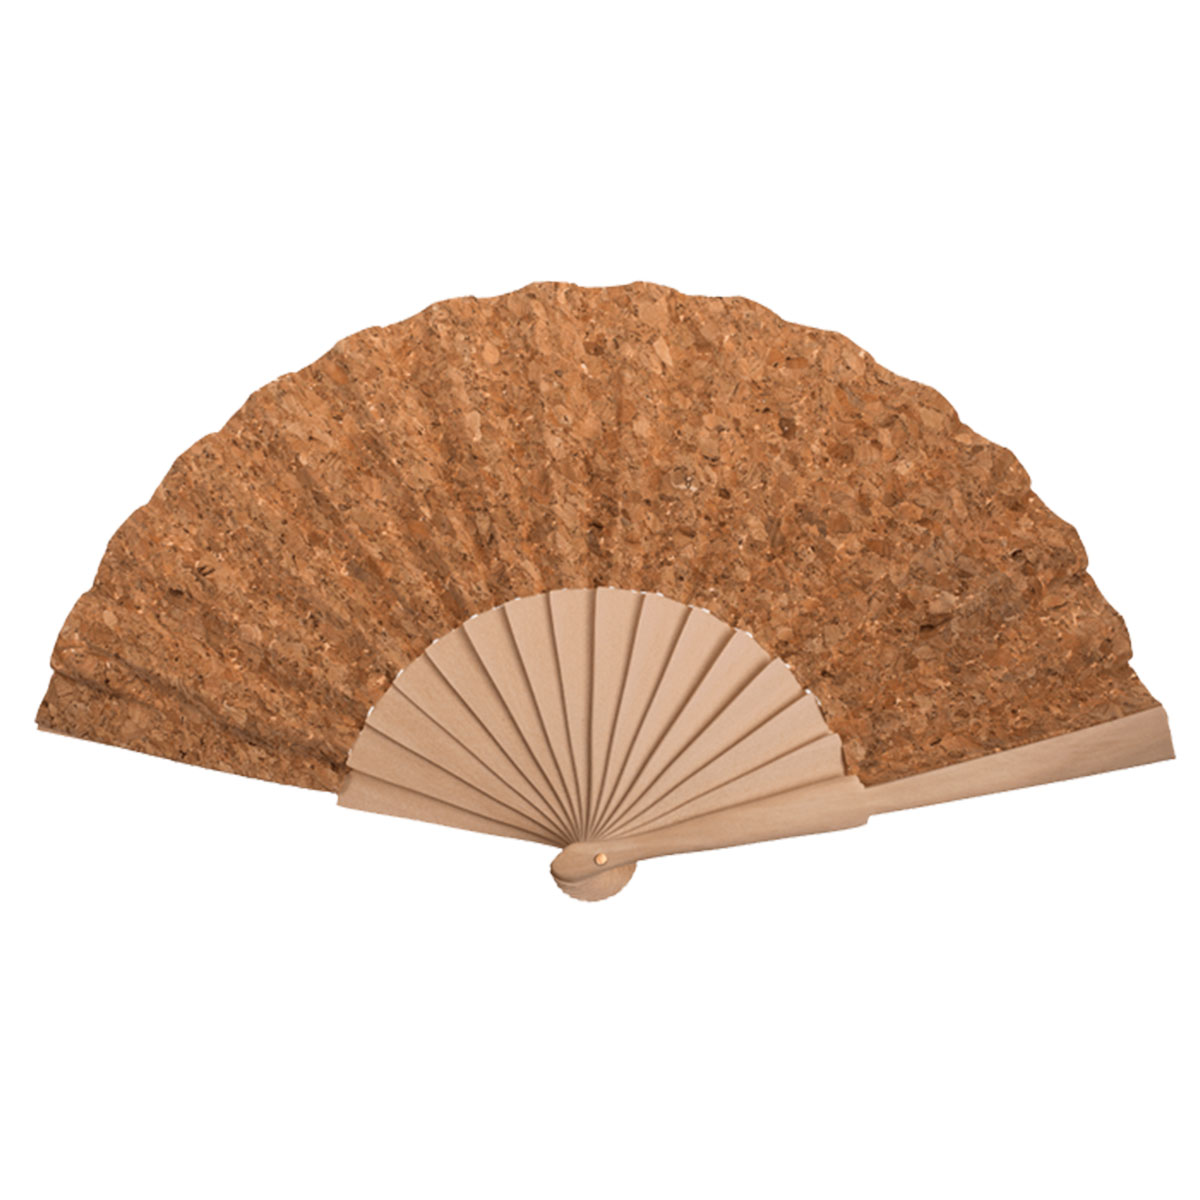 Decorative and utilitarian fan in wood and cork